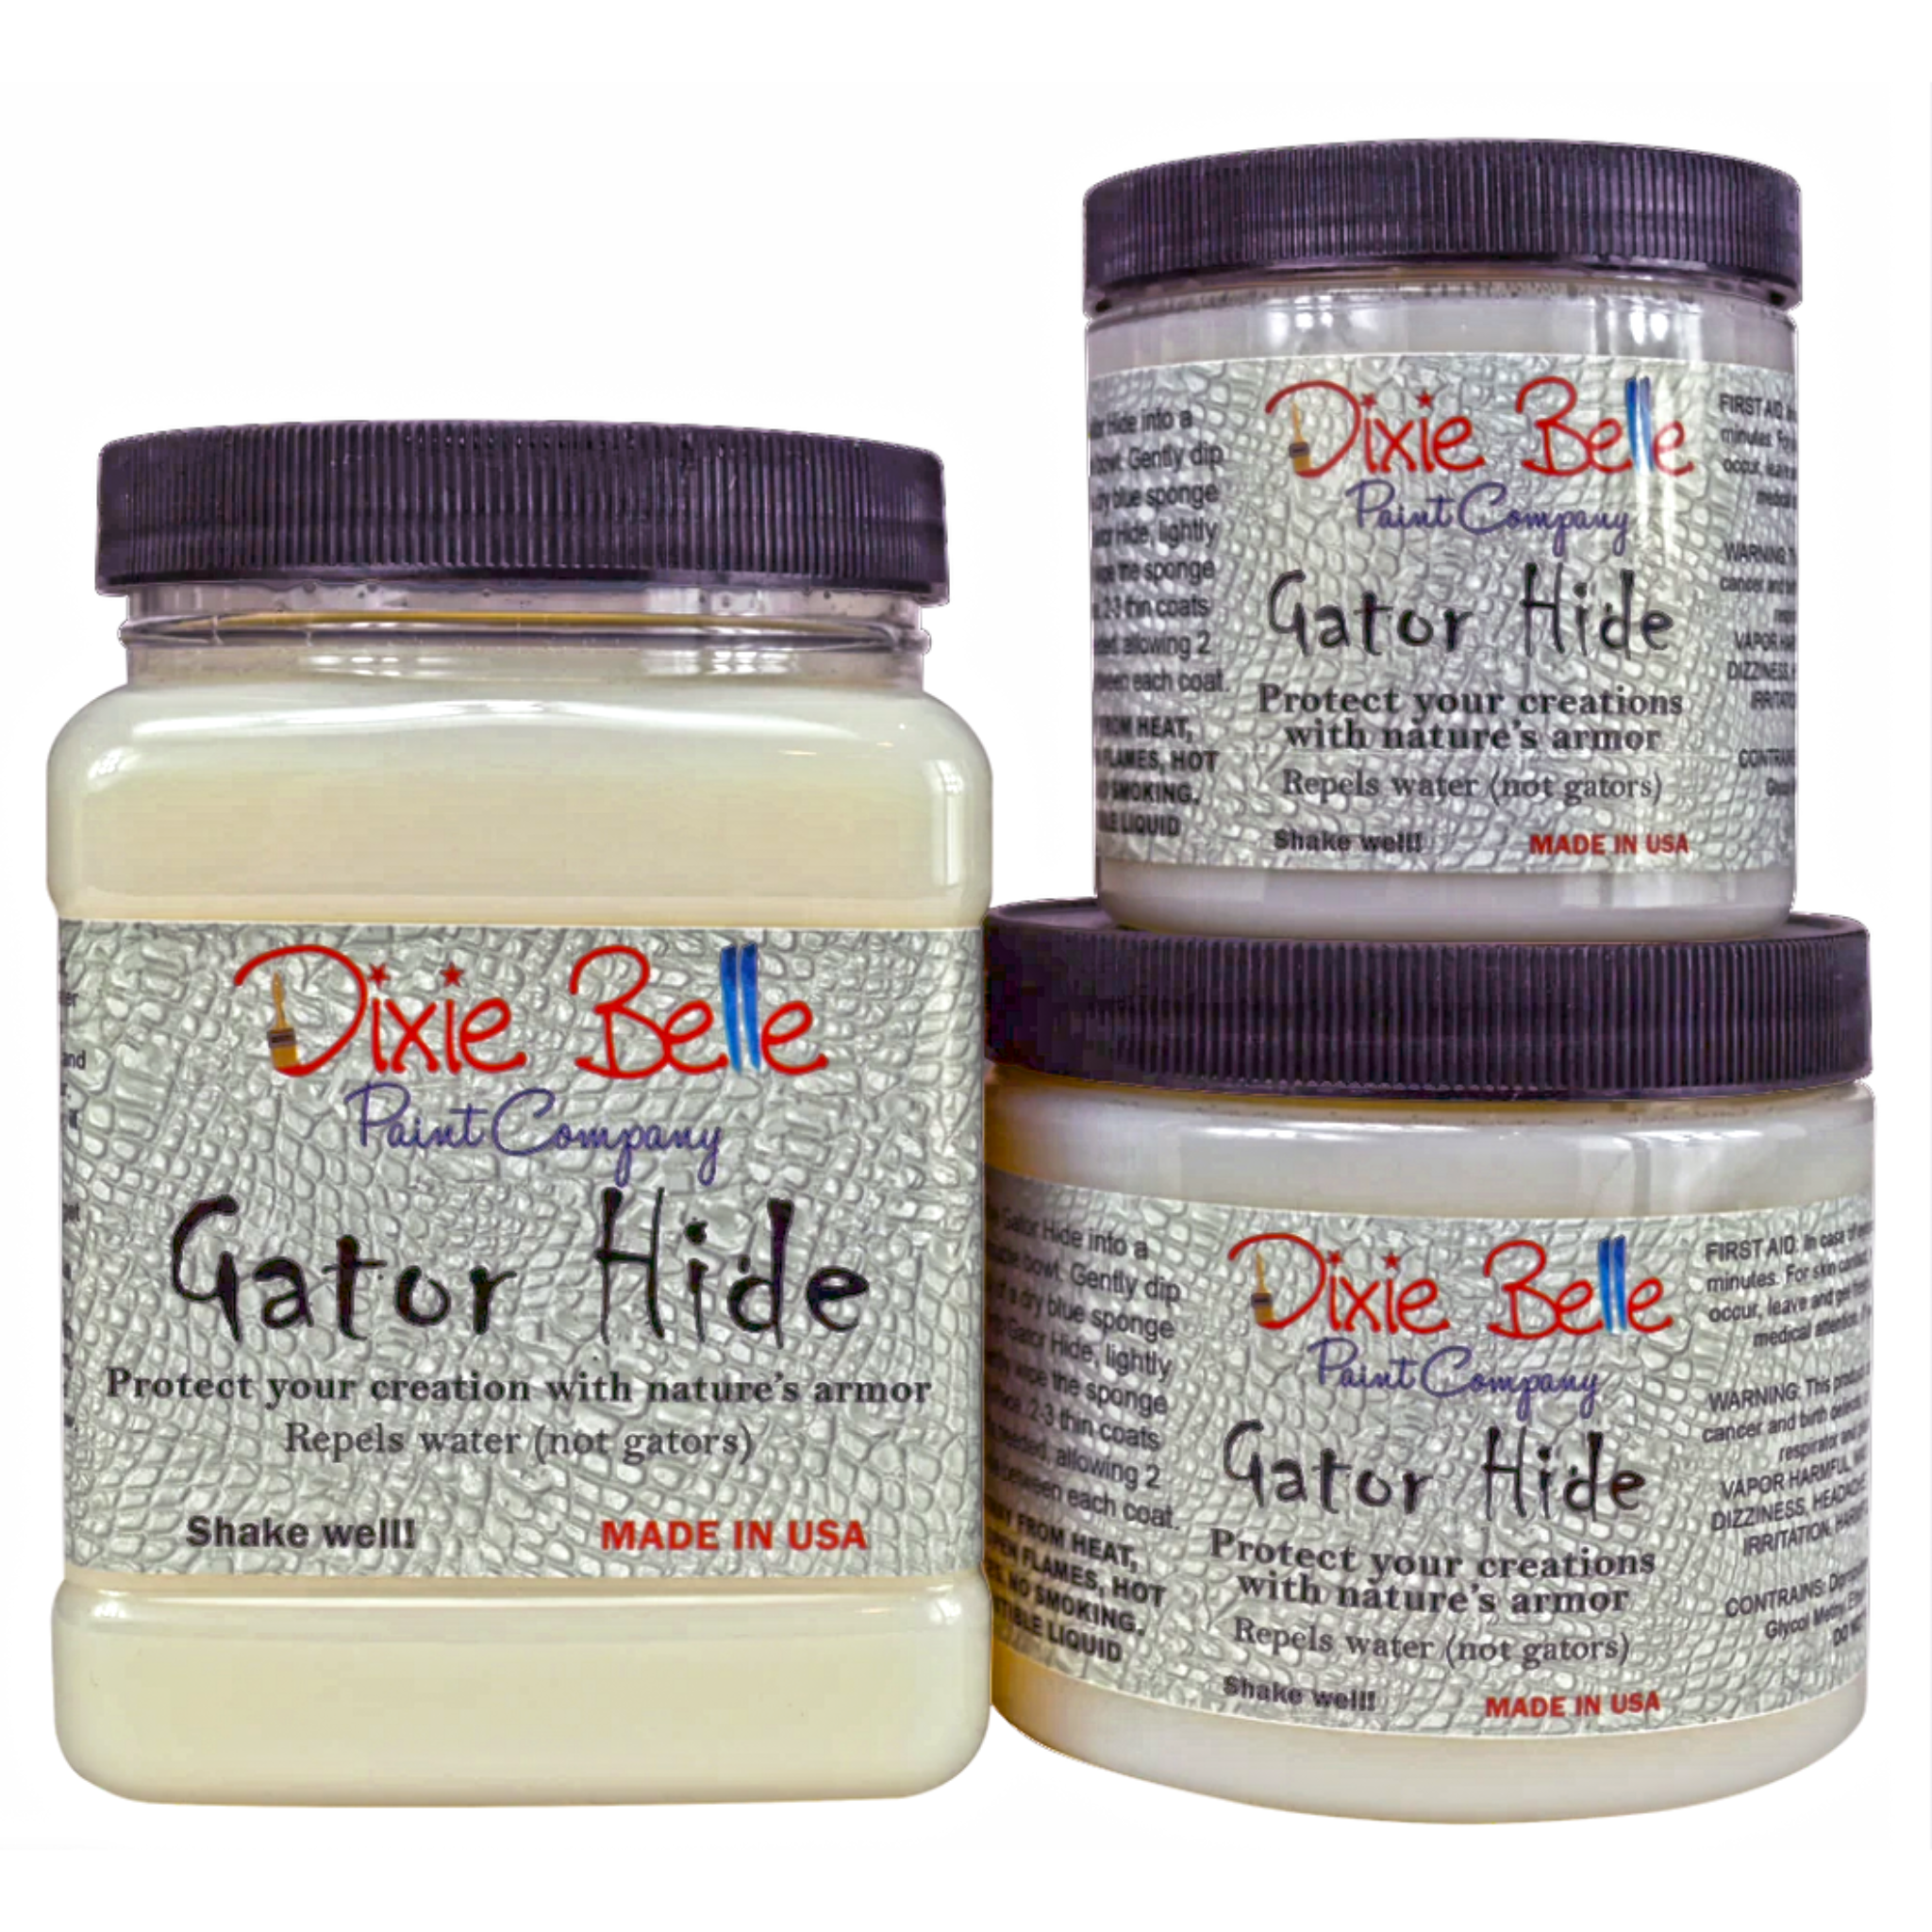 Three containers Dixie Belle Paint Company's Gator Hide are against a white background. A 32 oz container is on the left, and an 8 oz container sits on top of a 16 oz container on the right.